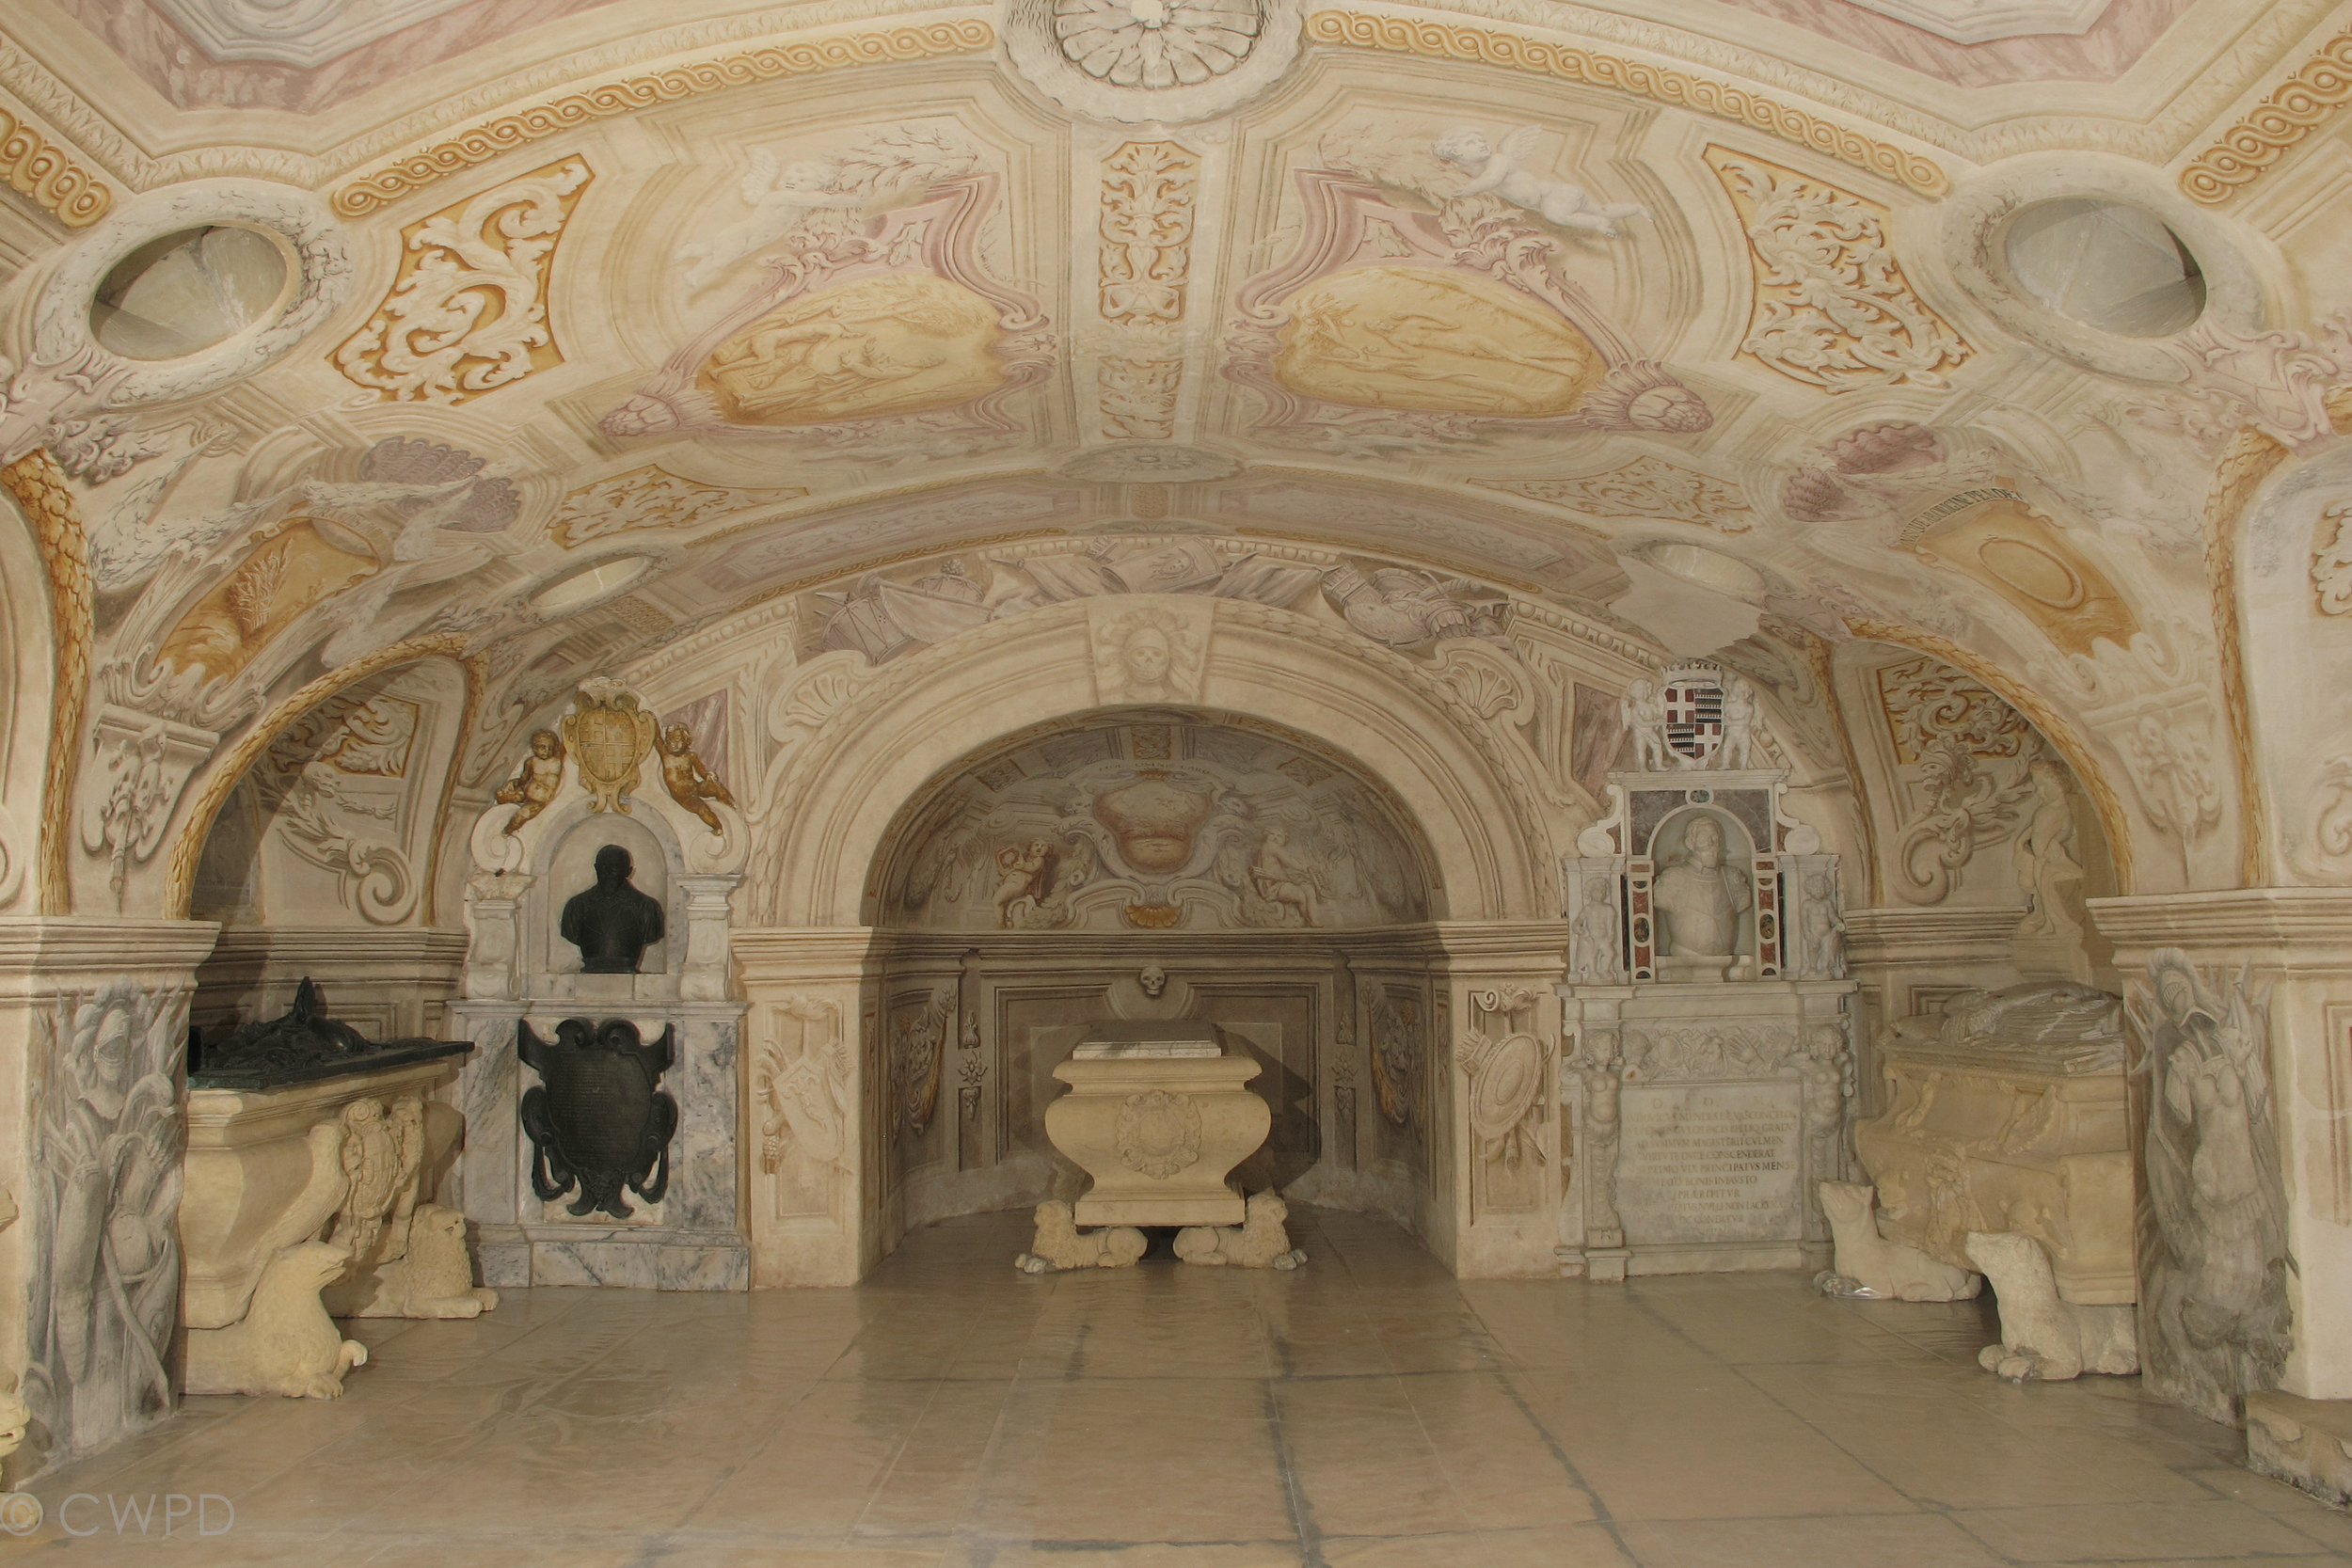  The Crypt after conservation treatment.&nbsp;  Image © Courtauld CWPD 